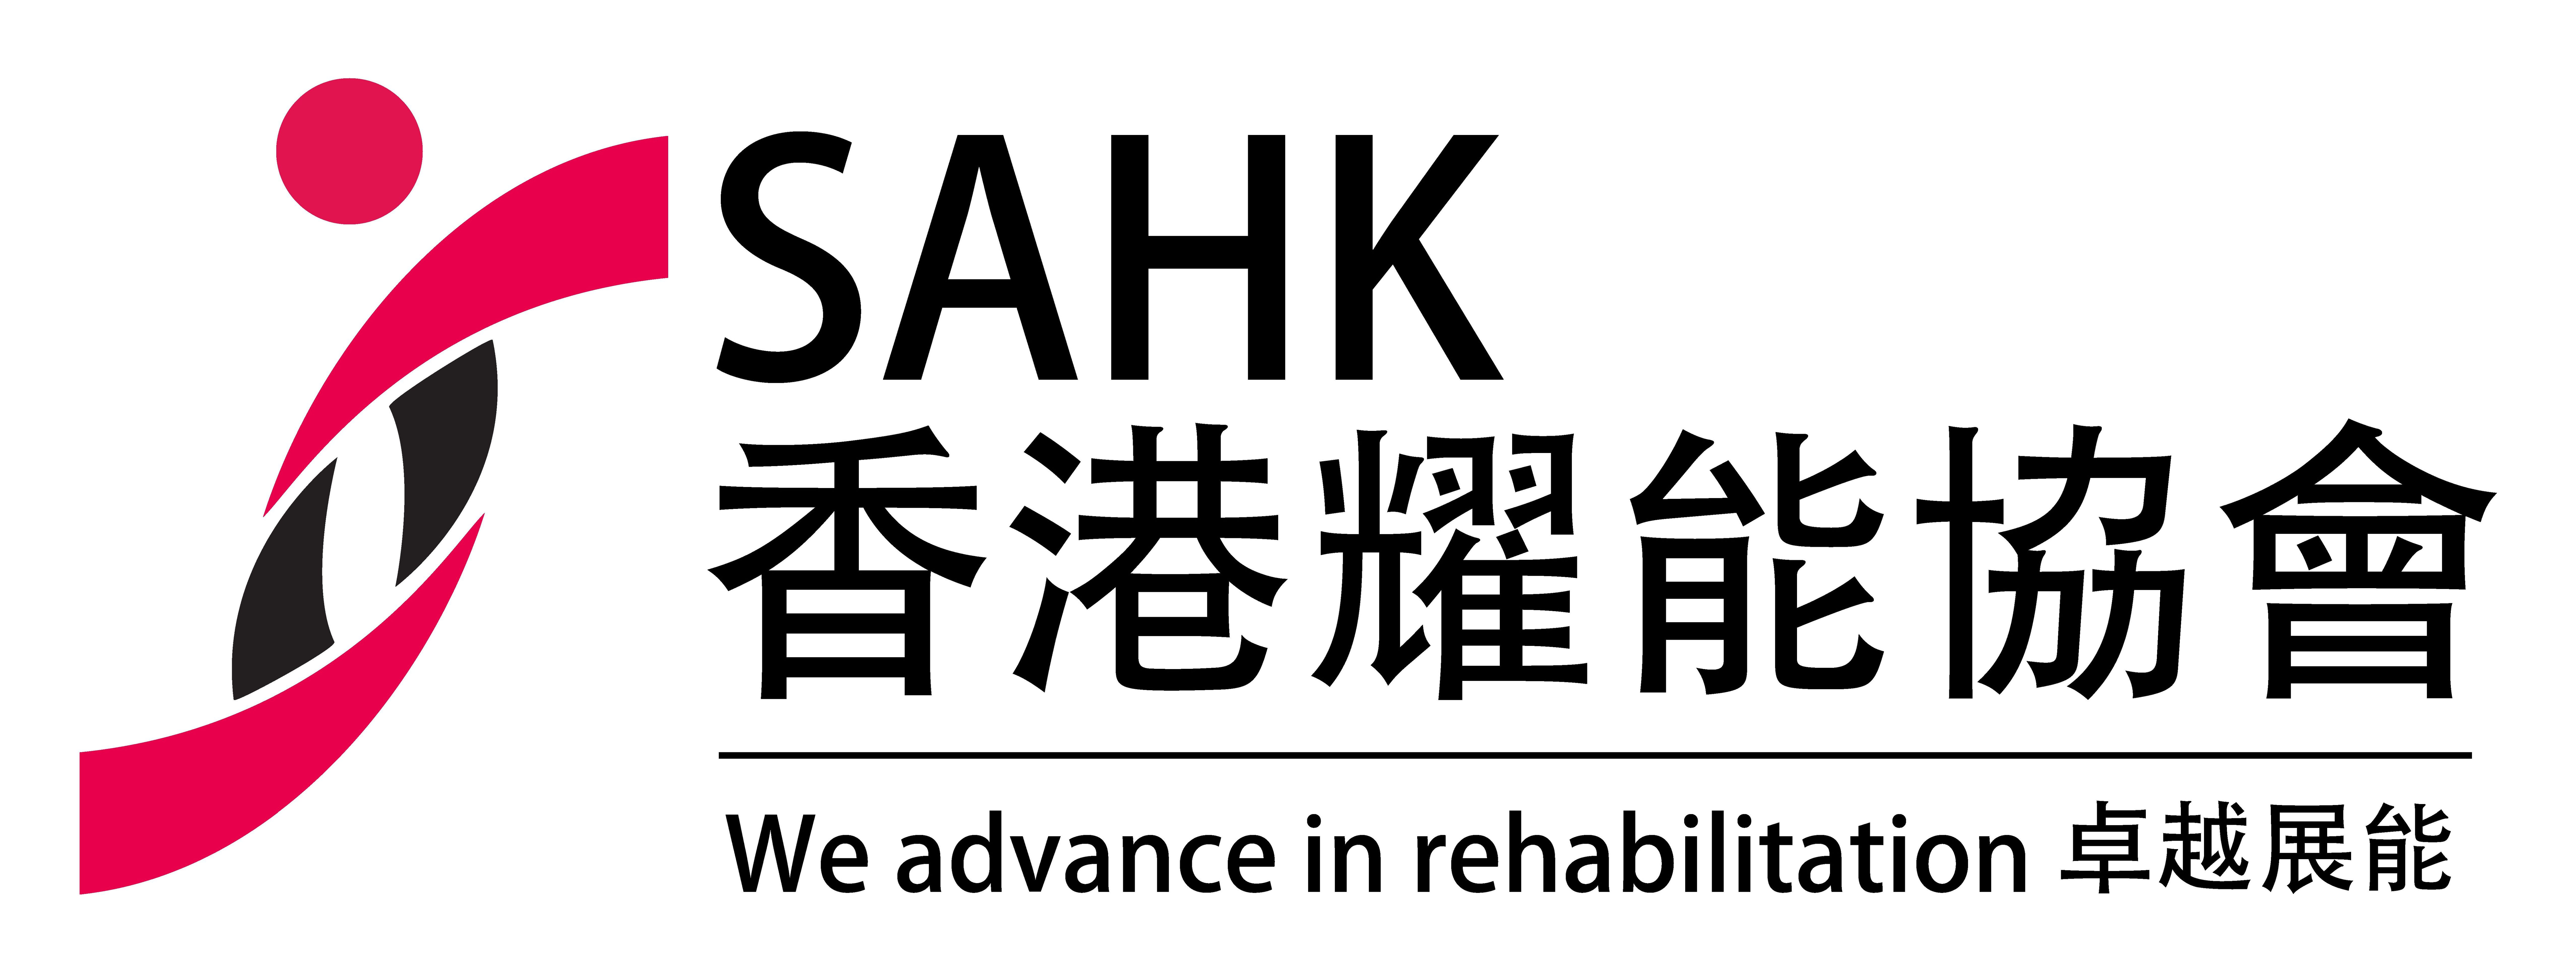 Click for more information on the SAHK iogo